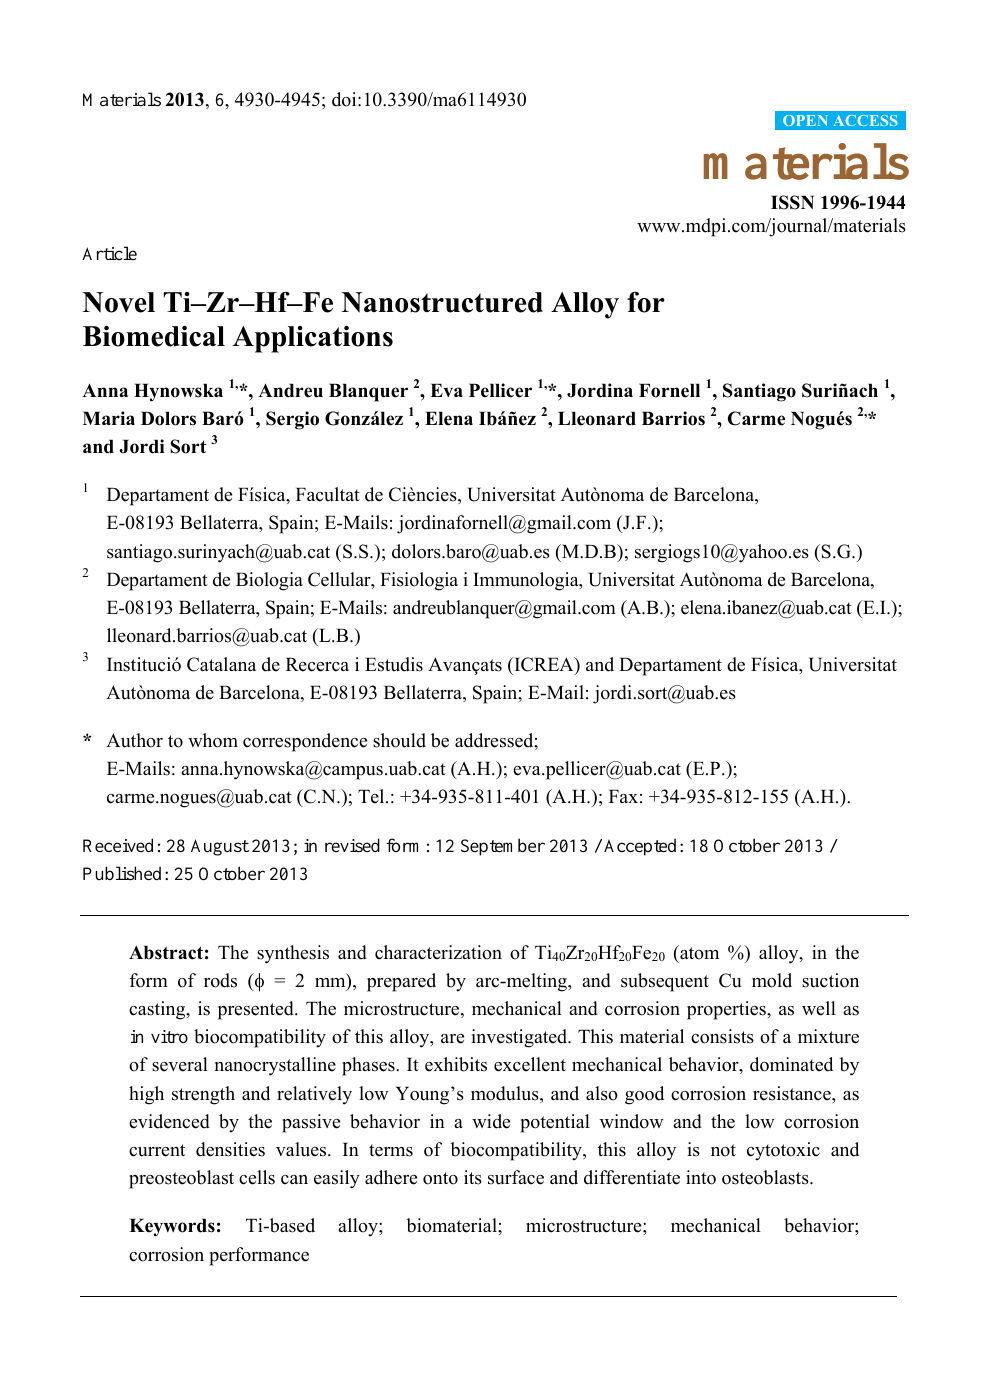 Novel Ti Zr Hf Fe Nanostructured Alloy For Biomedical Applications Topic Of Research Paper In Materials Engineering Download Scholarly Article Pdf And Read For Free On Cyberleninka Open Science Hub